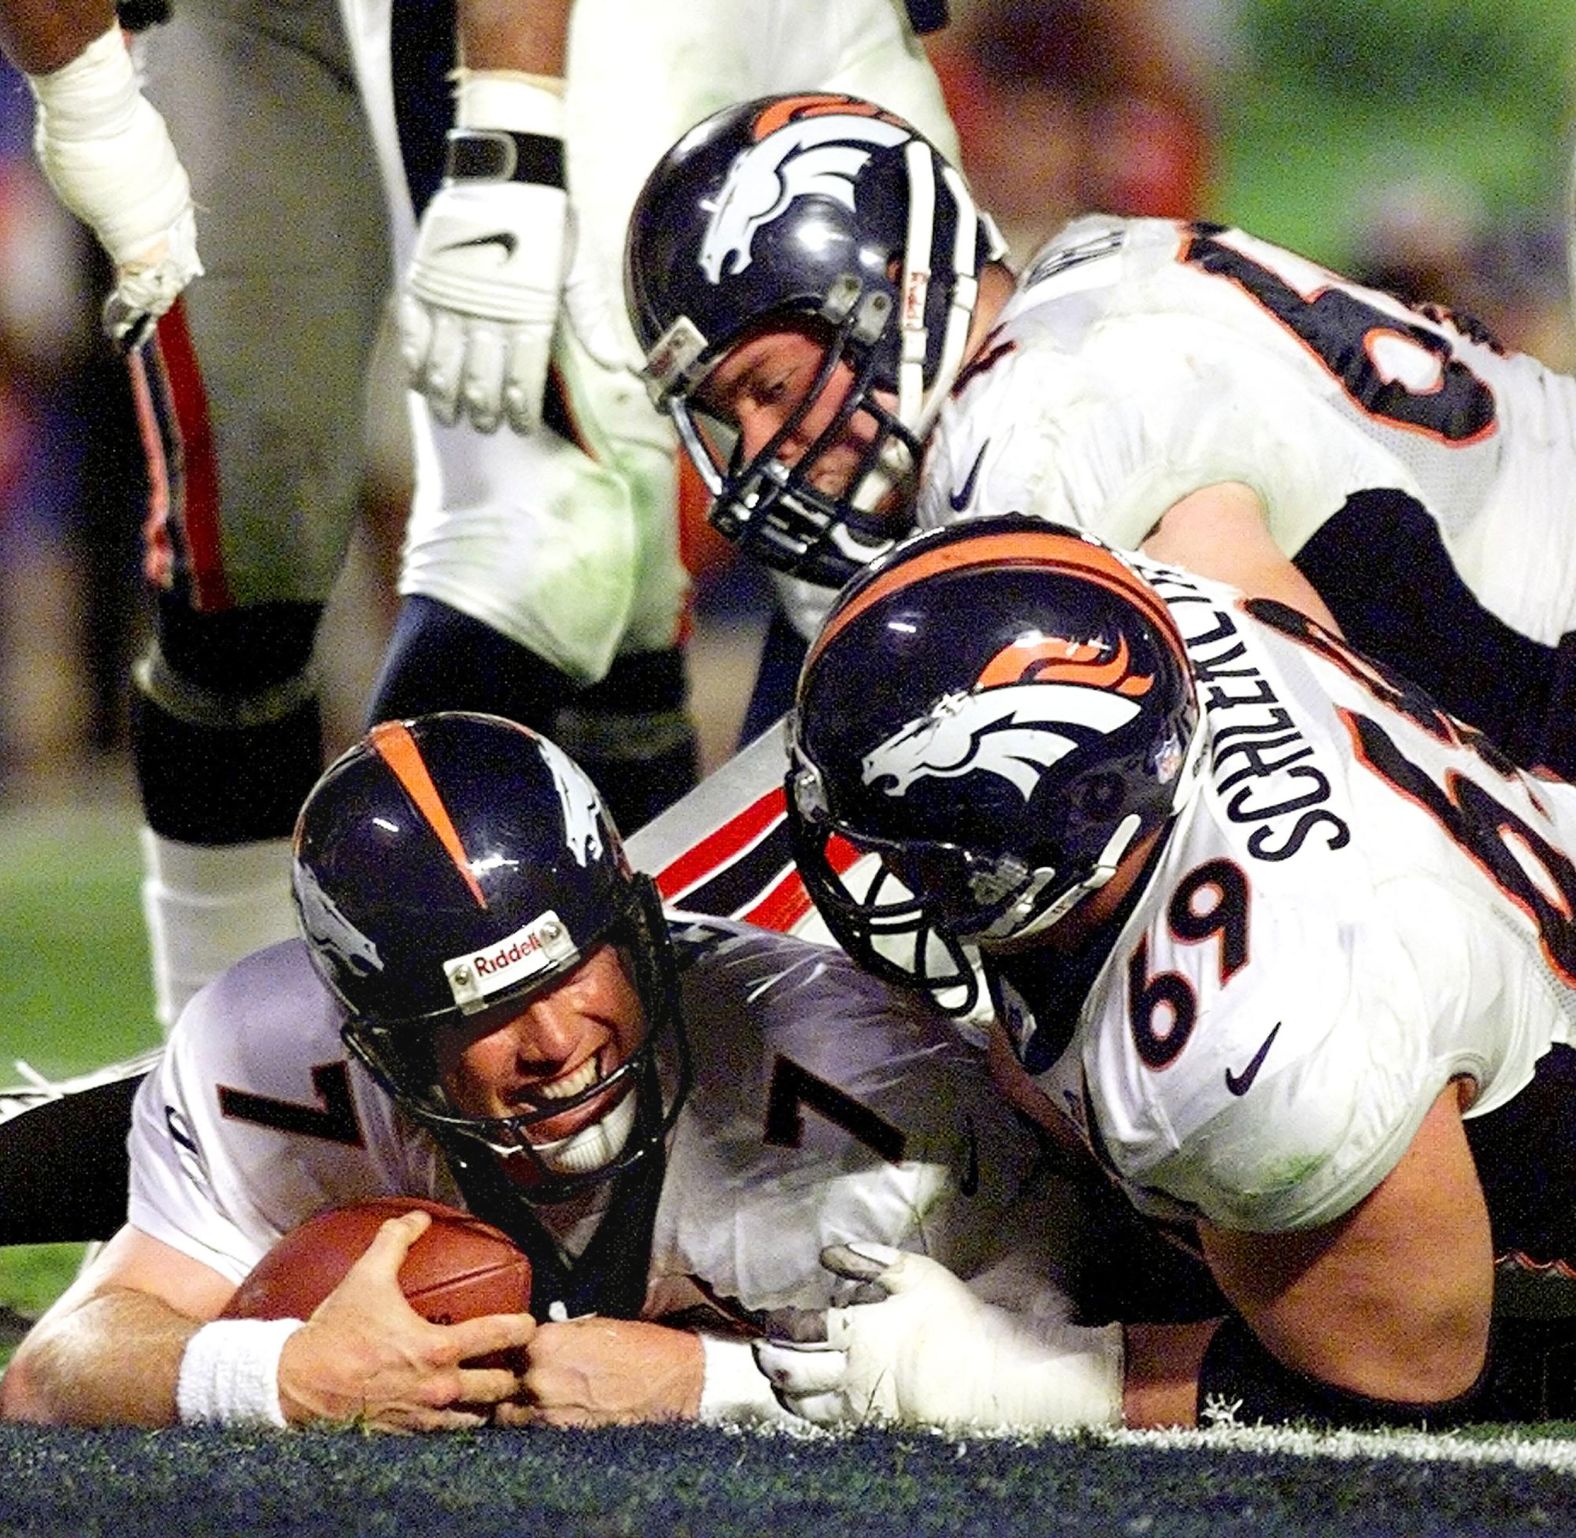 <strong>Super Bowl XXXIII (1999):</strong> Denver quarterback John Elway smiles after scoring a touchdown in Super Bowl XXXIII. Elway was named MVP of the game, throwing for 336 yards as the Broncos won back-to-back titles with a 34-19 victory over Atlanta. It was Elway's last game before he retired.